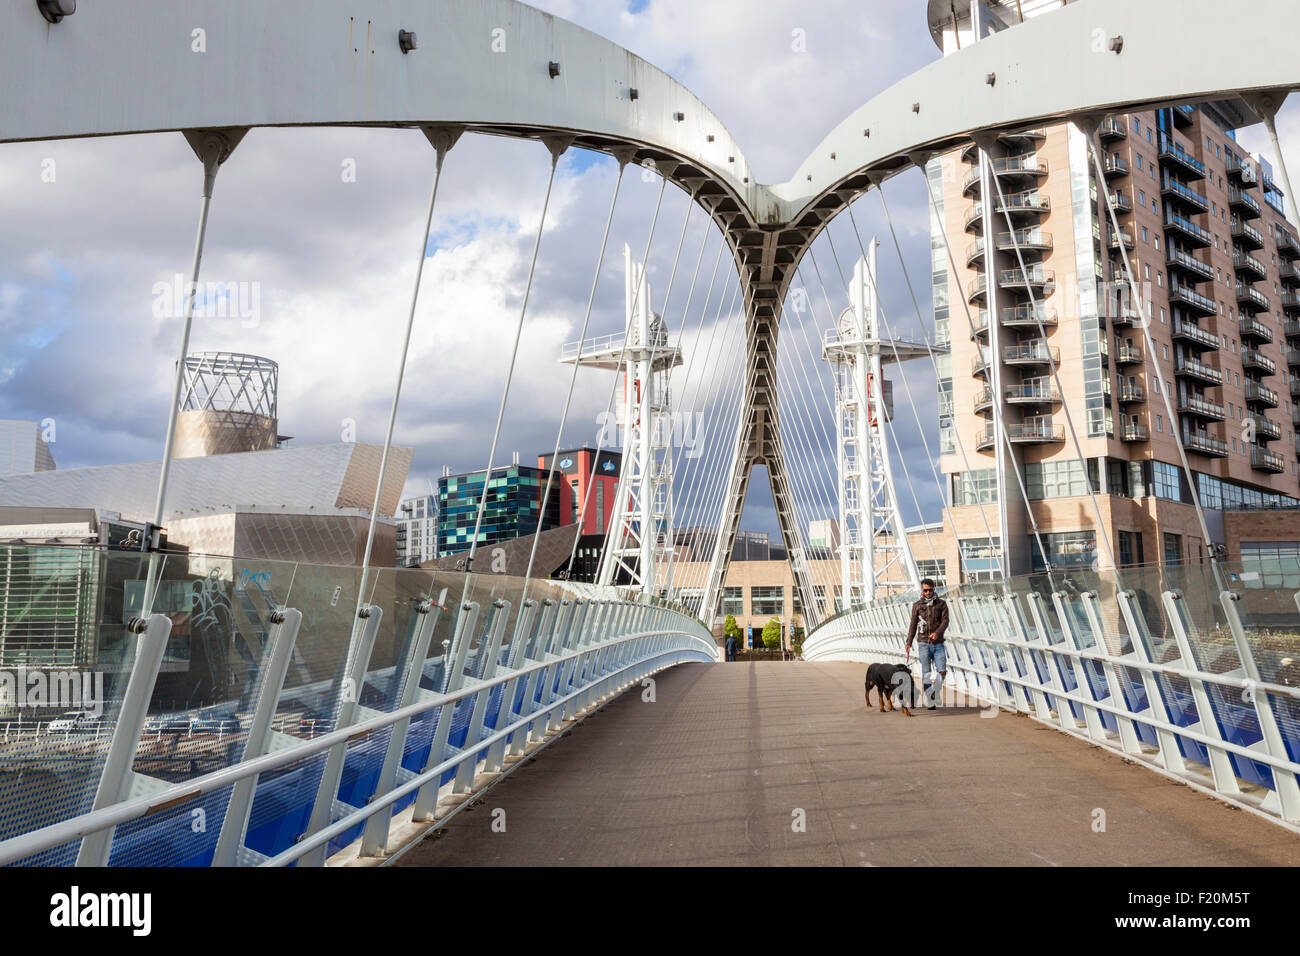 A person crossing the Salford Quays lift bridge also known as the Lowry Bridge or Millennium footbridge, Salford Quays, Manchester, England, UK Stock Photo